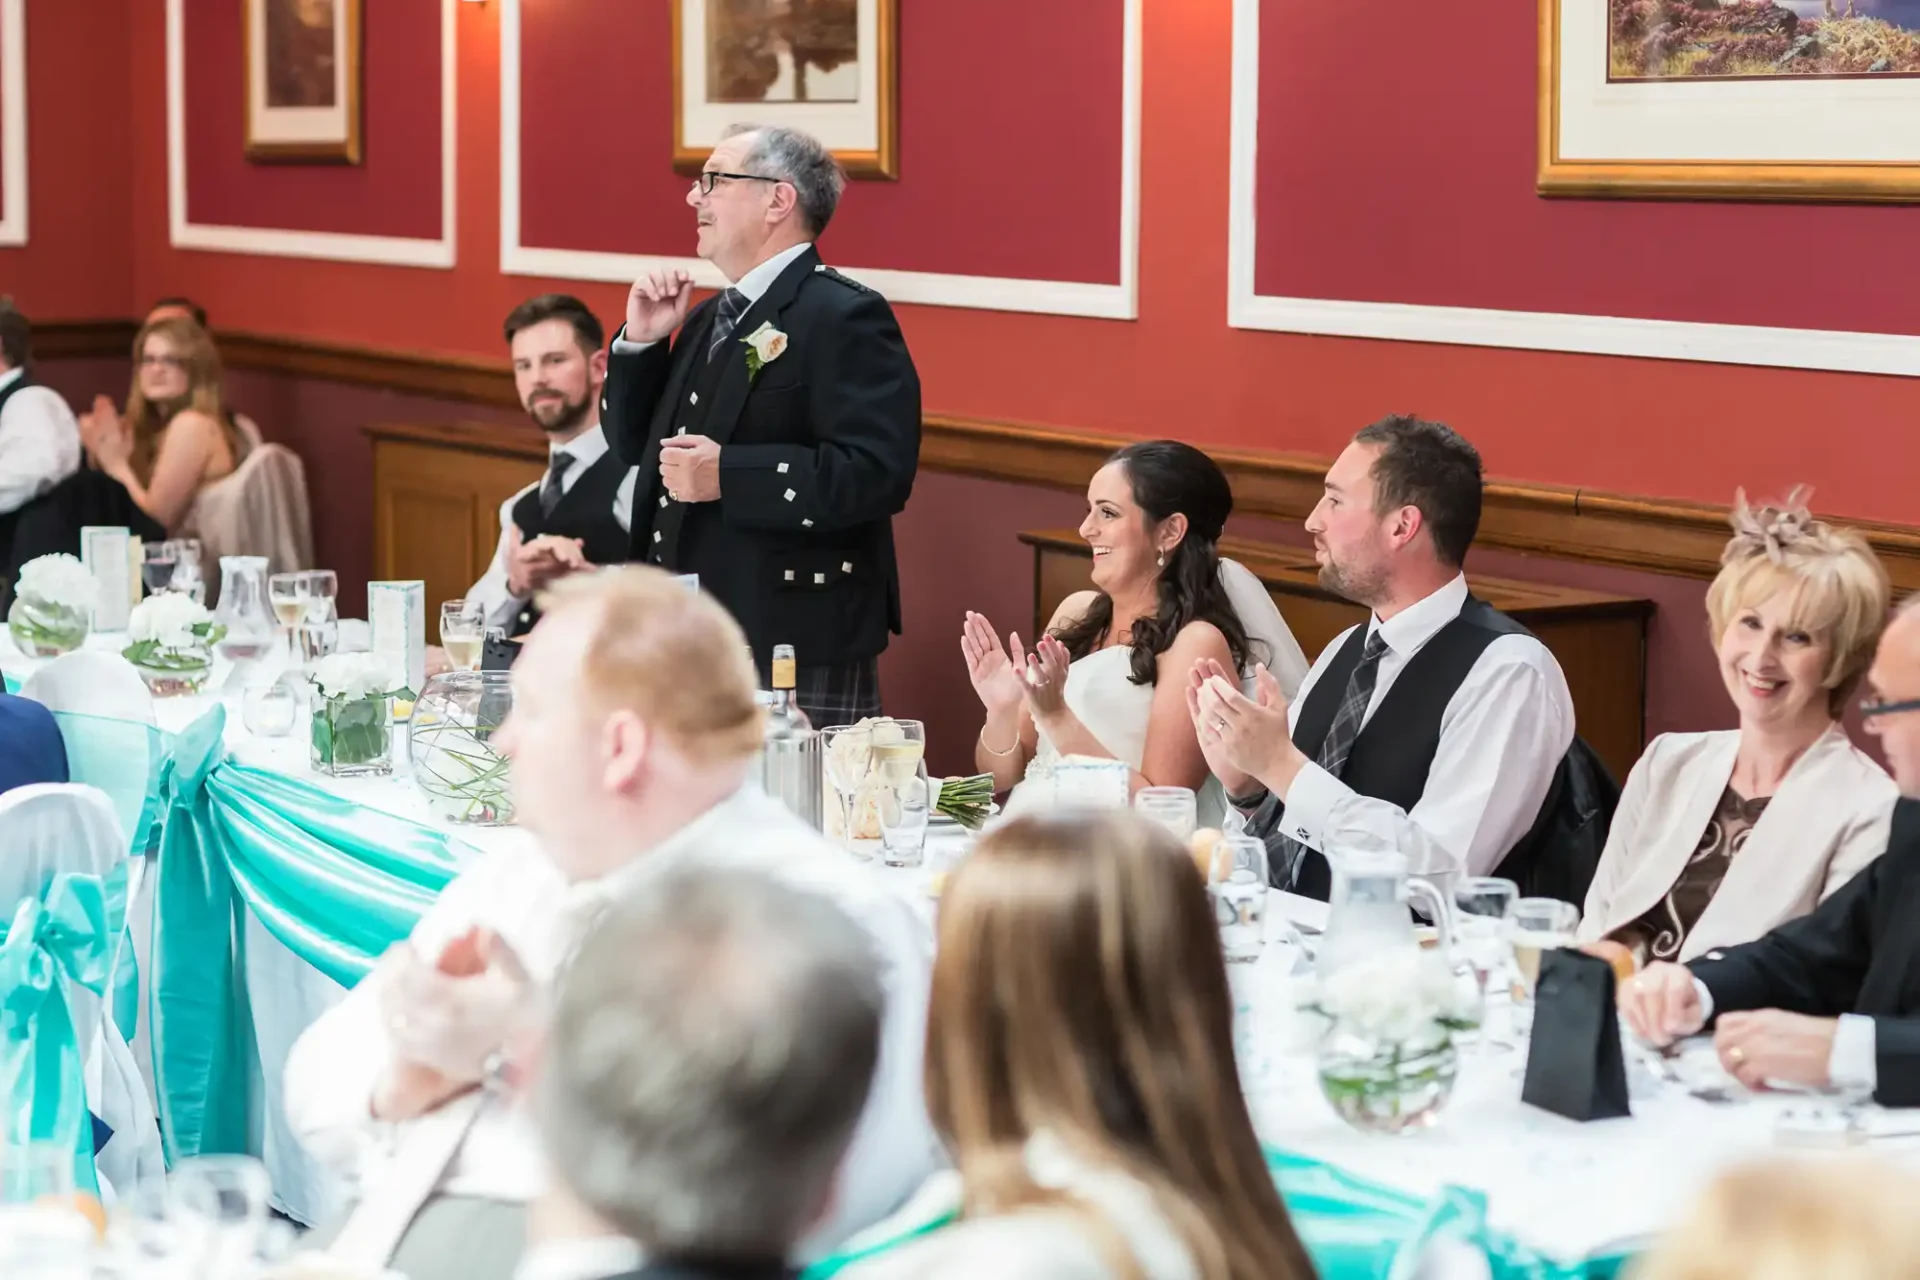 An older man in a kilt giving a speech at a wedding reception while guests, including a clapping bride and groom, listen attentively.